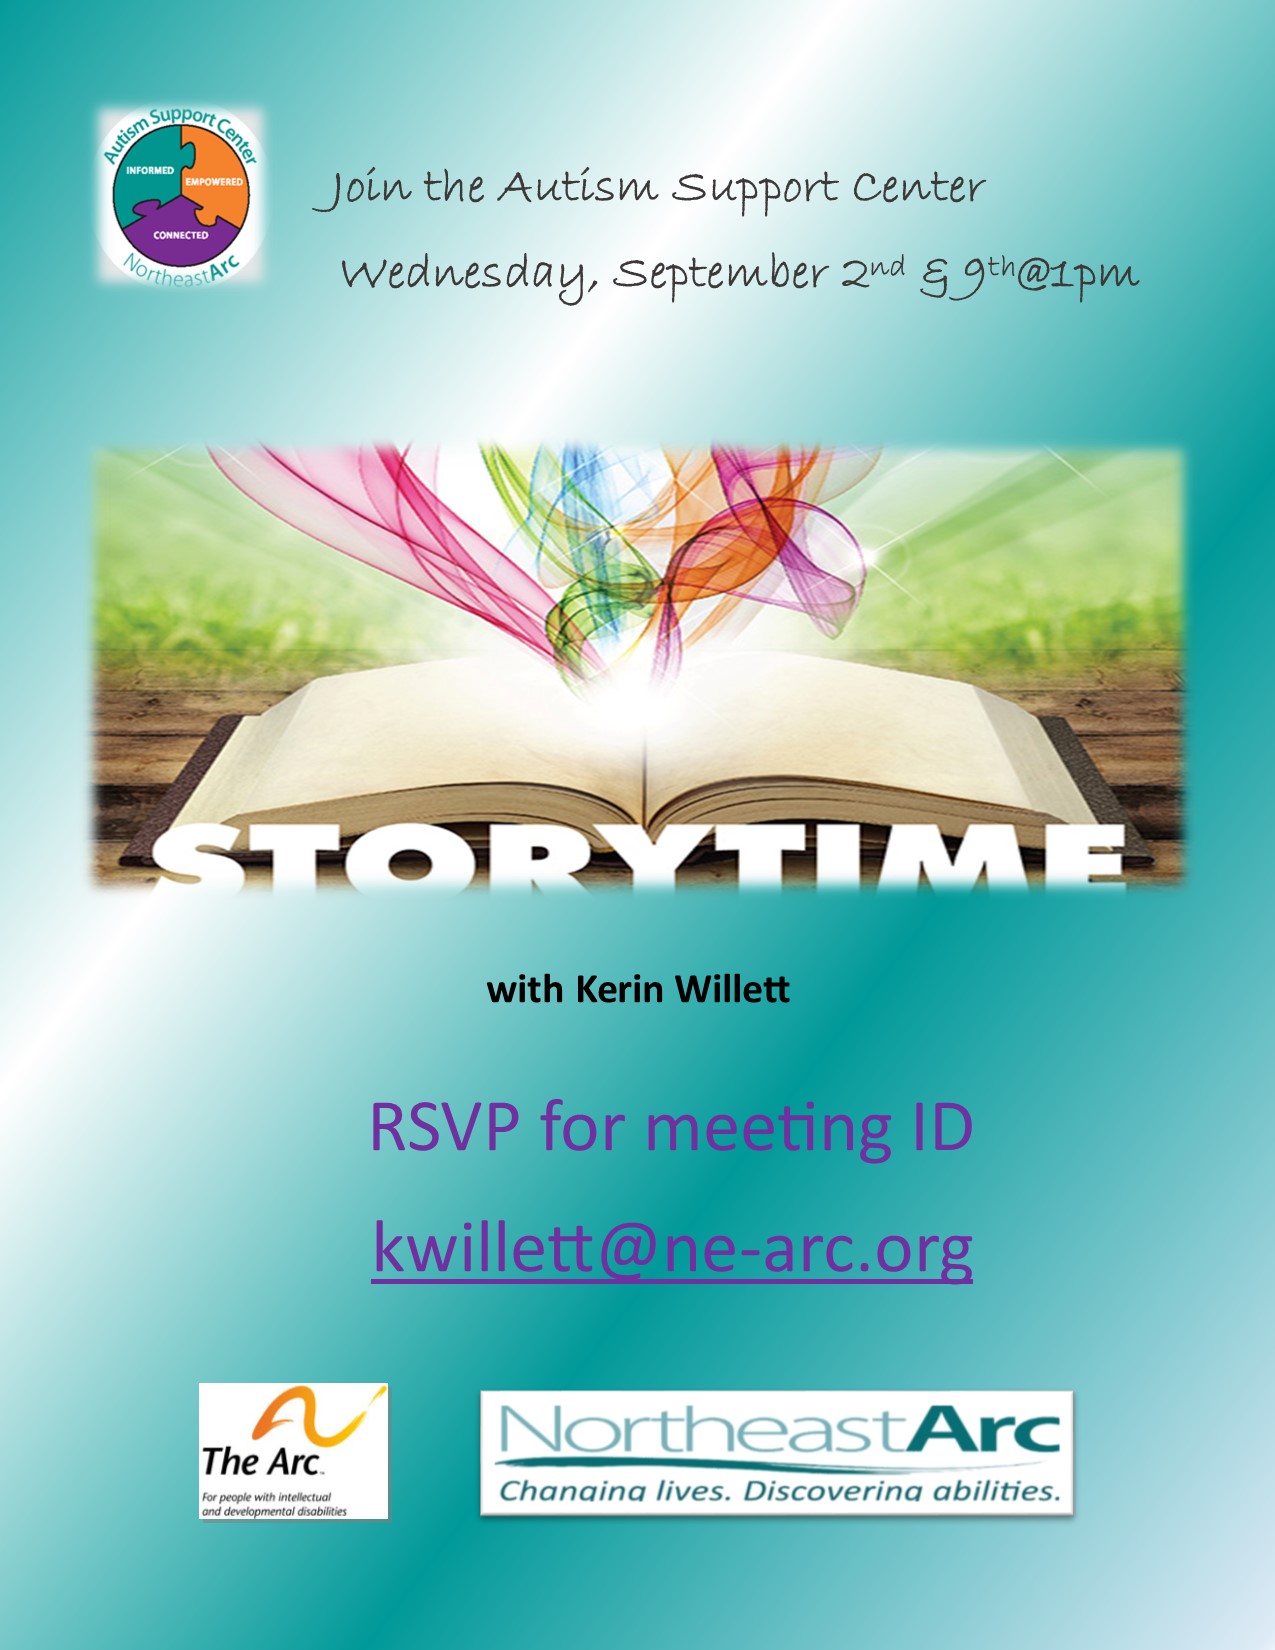 Flyer for Story Time Event with Kerin